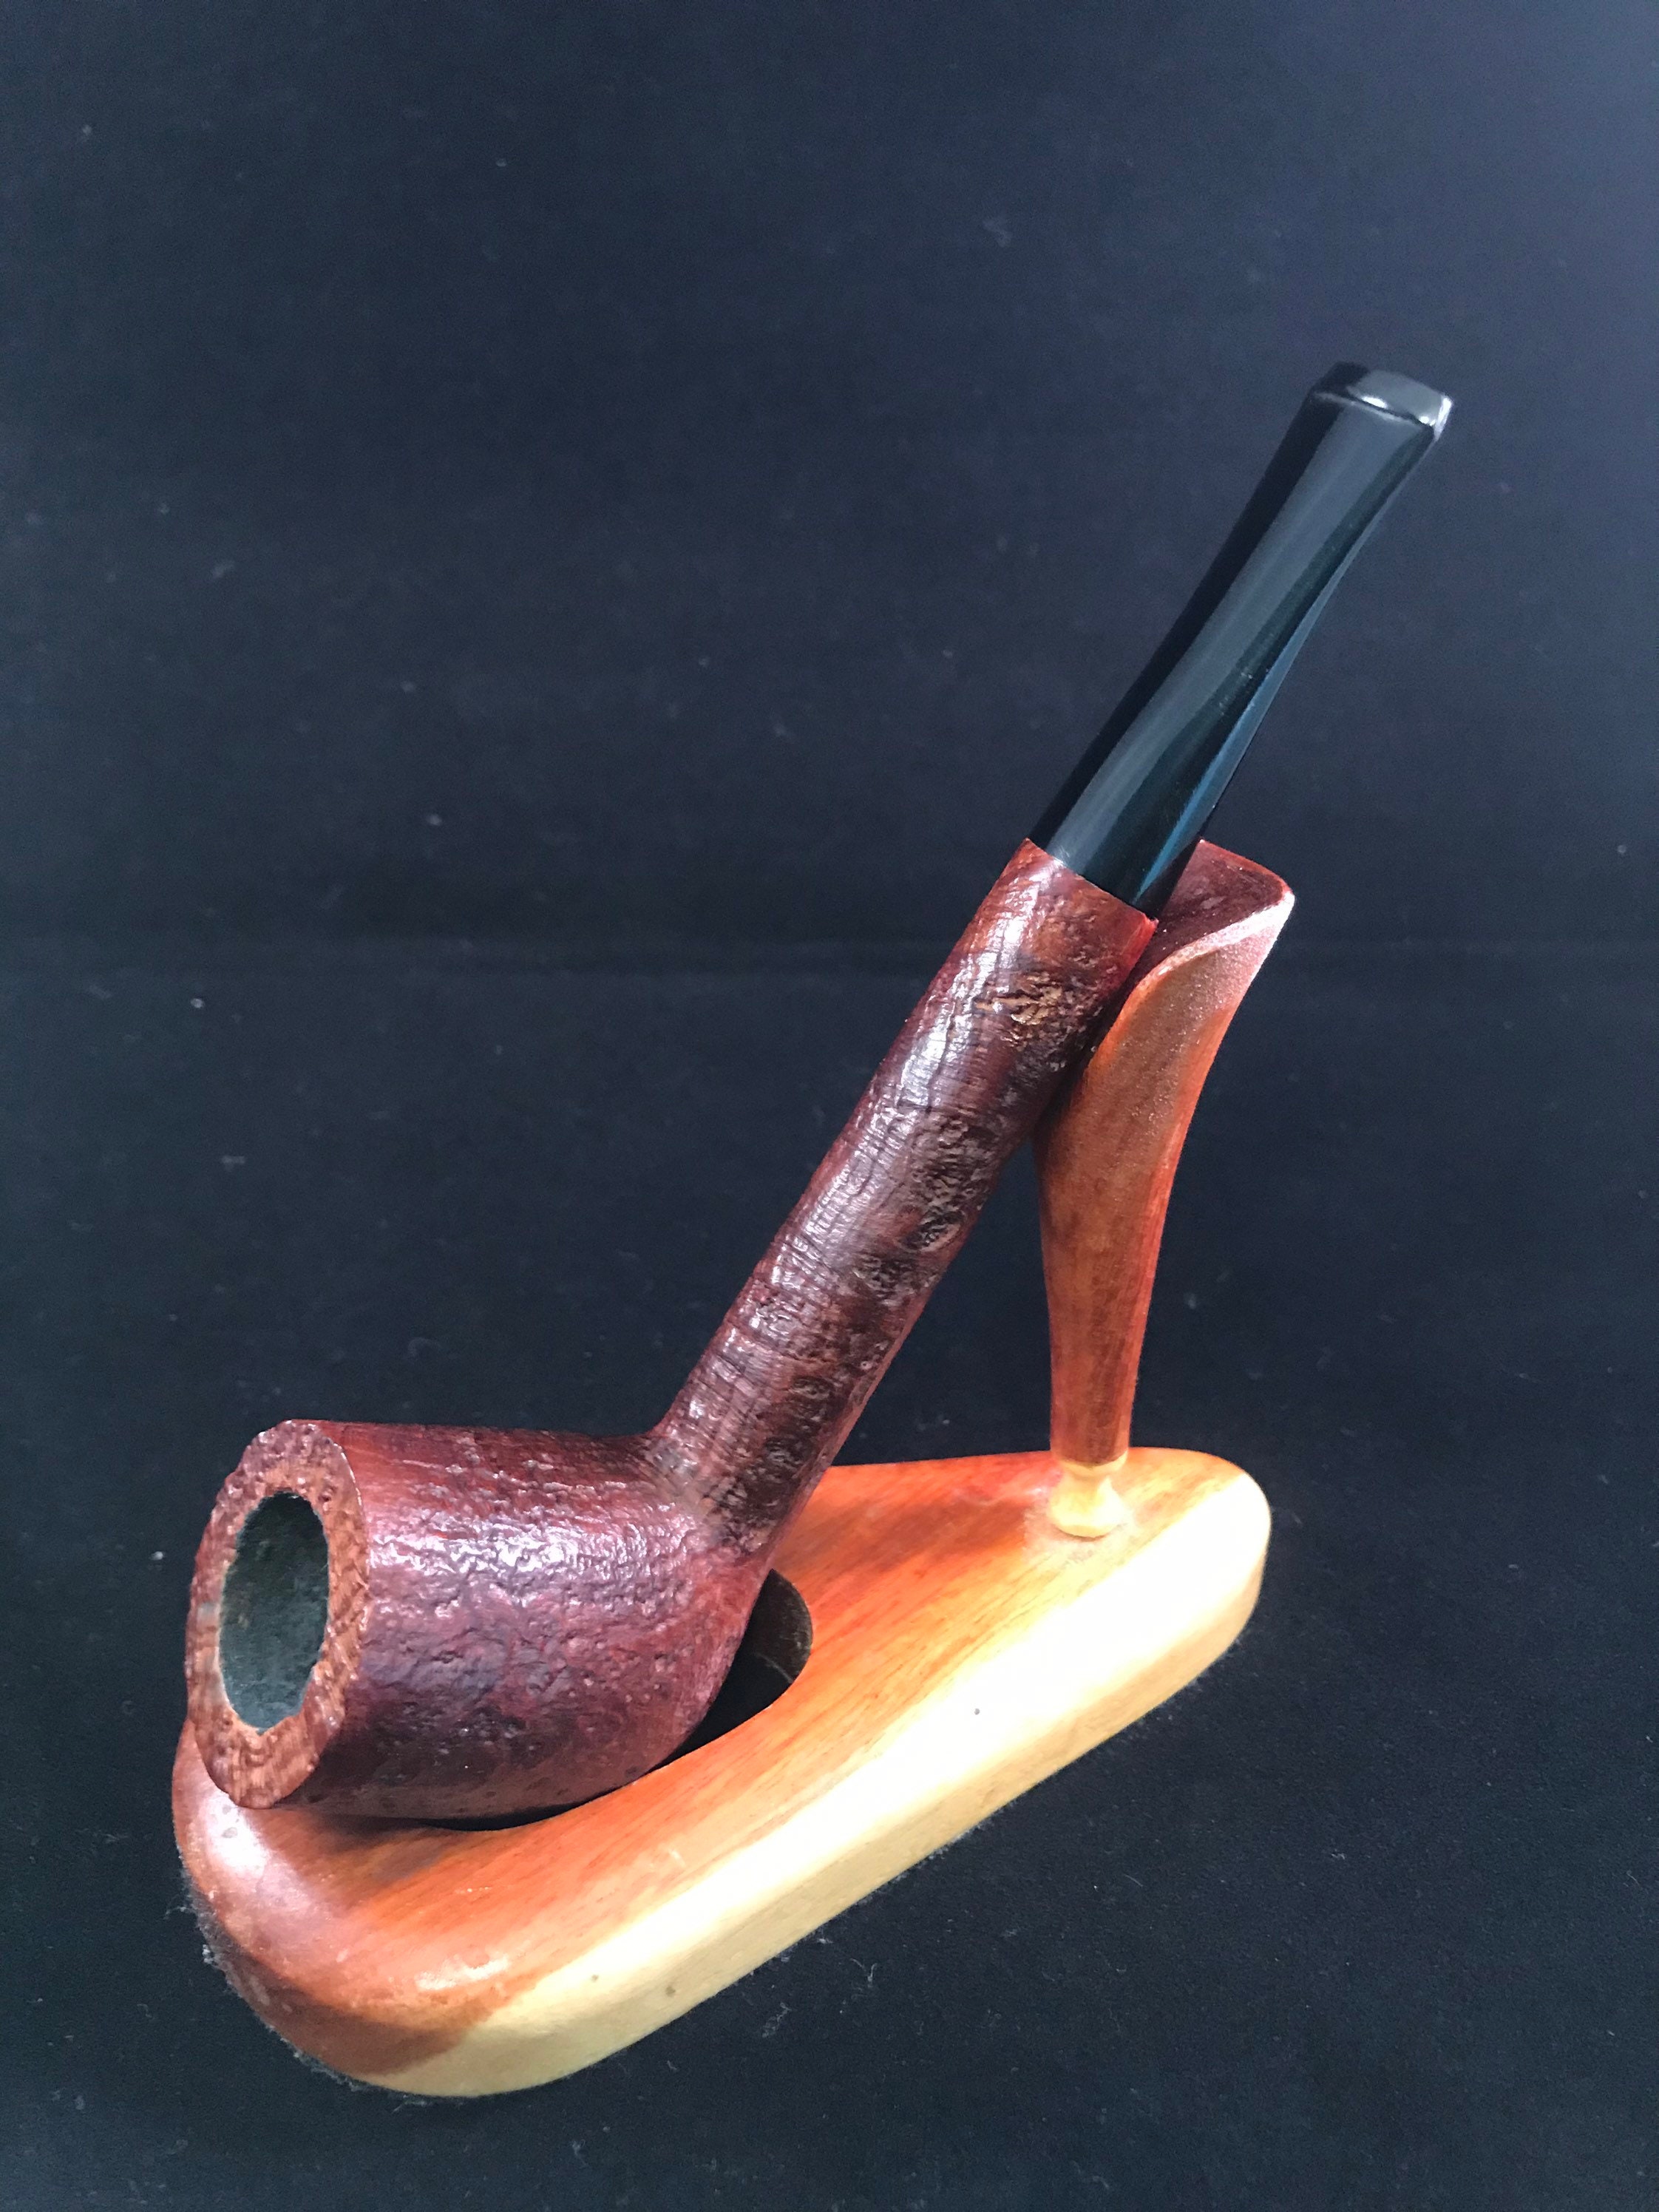 Oval Pipe Stem: 23.75 to 25.5